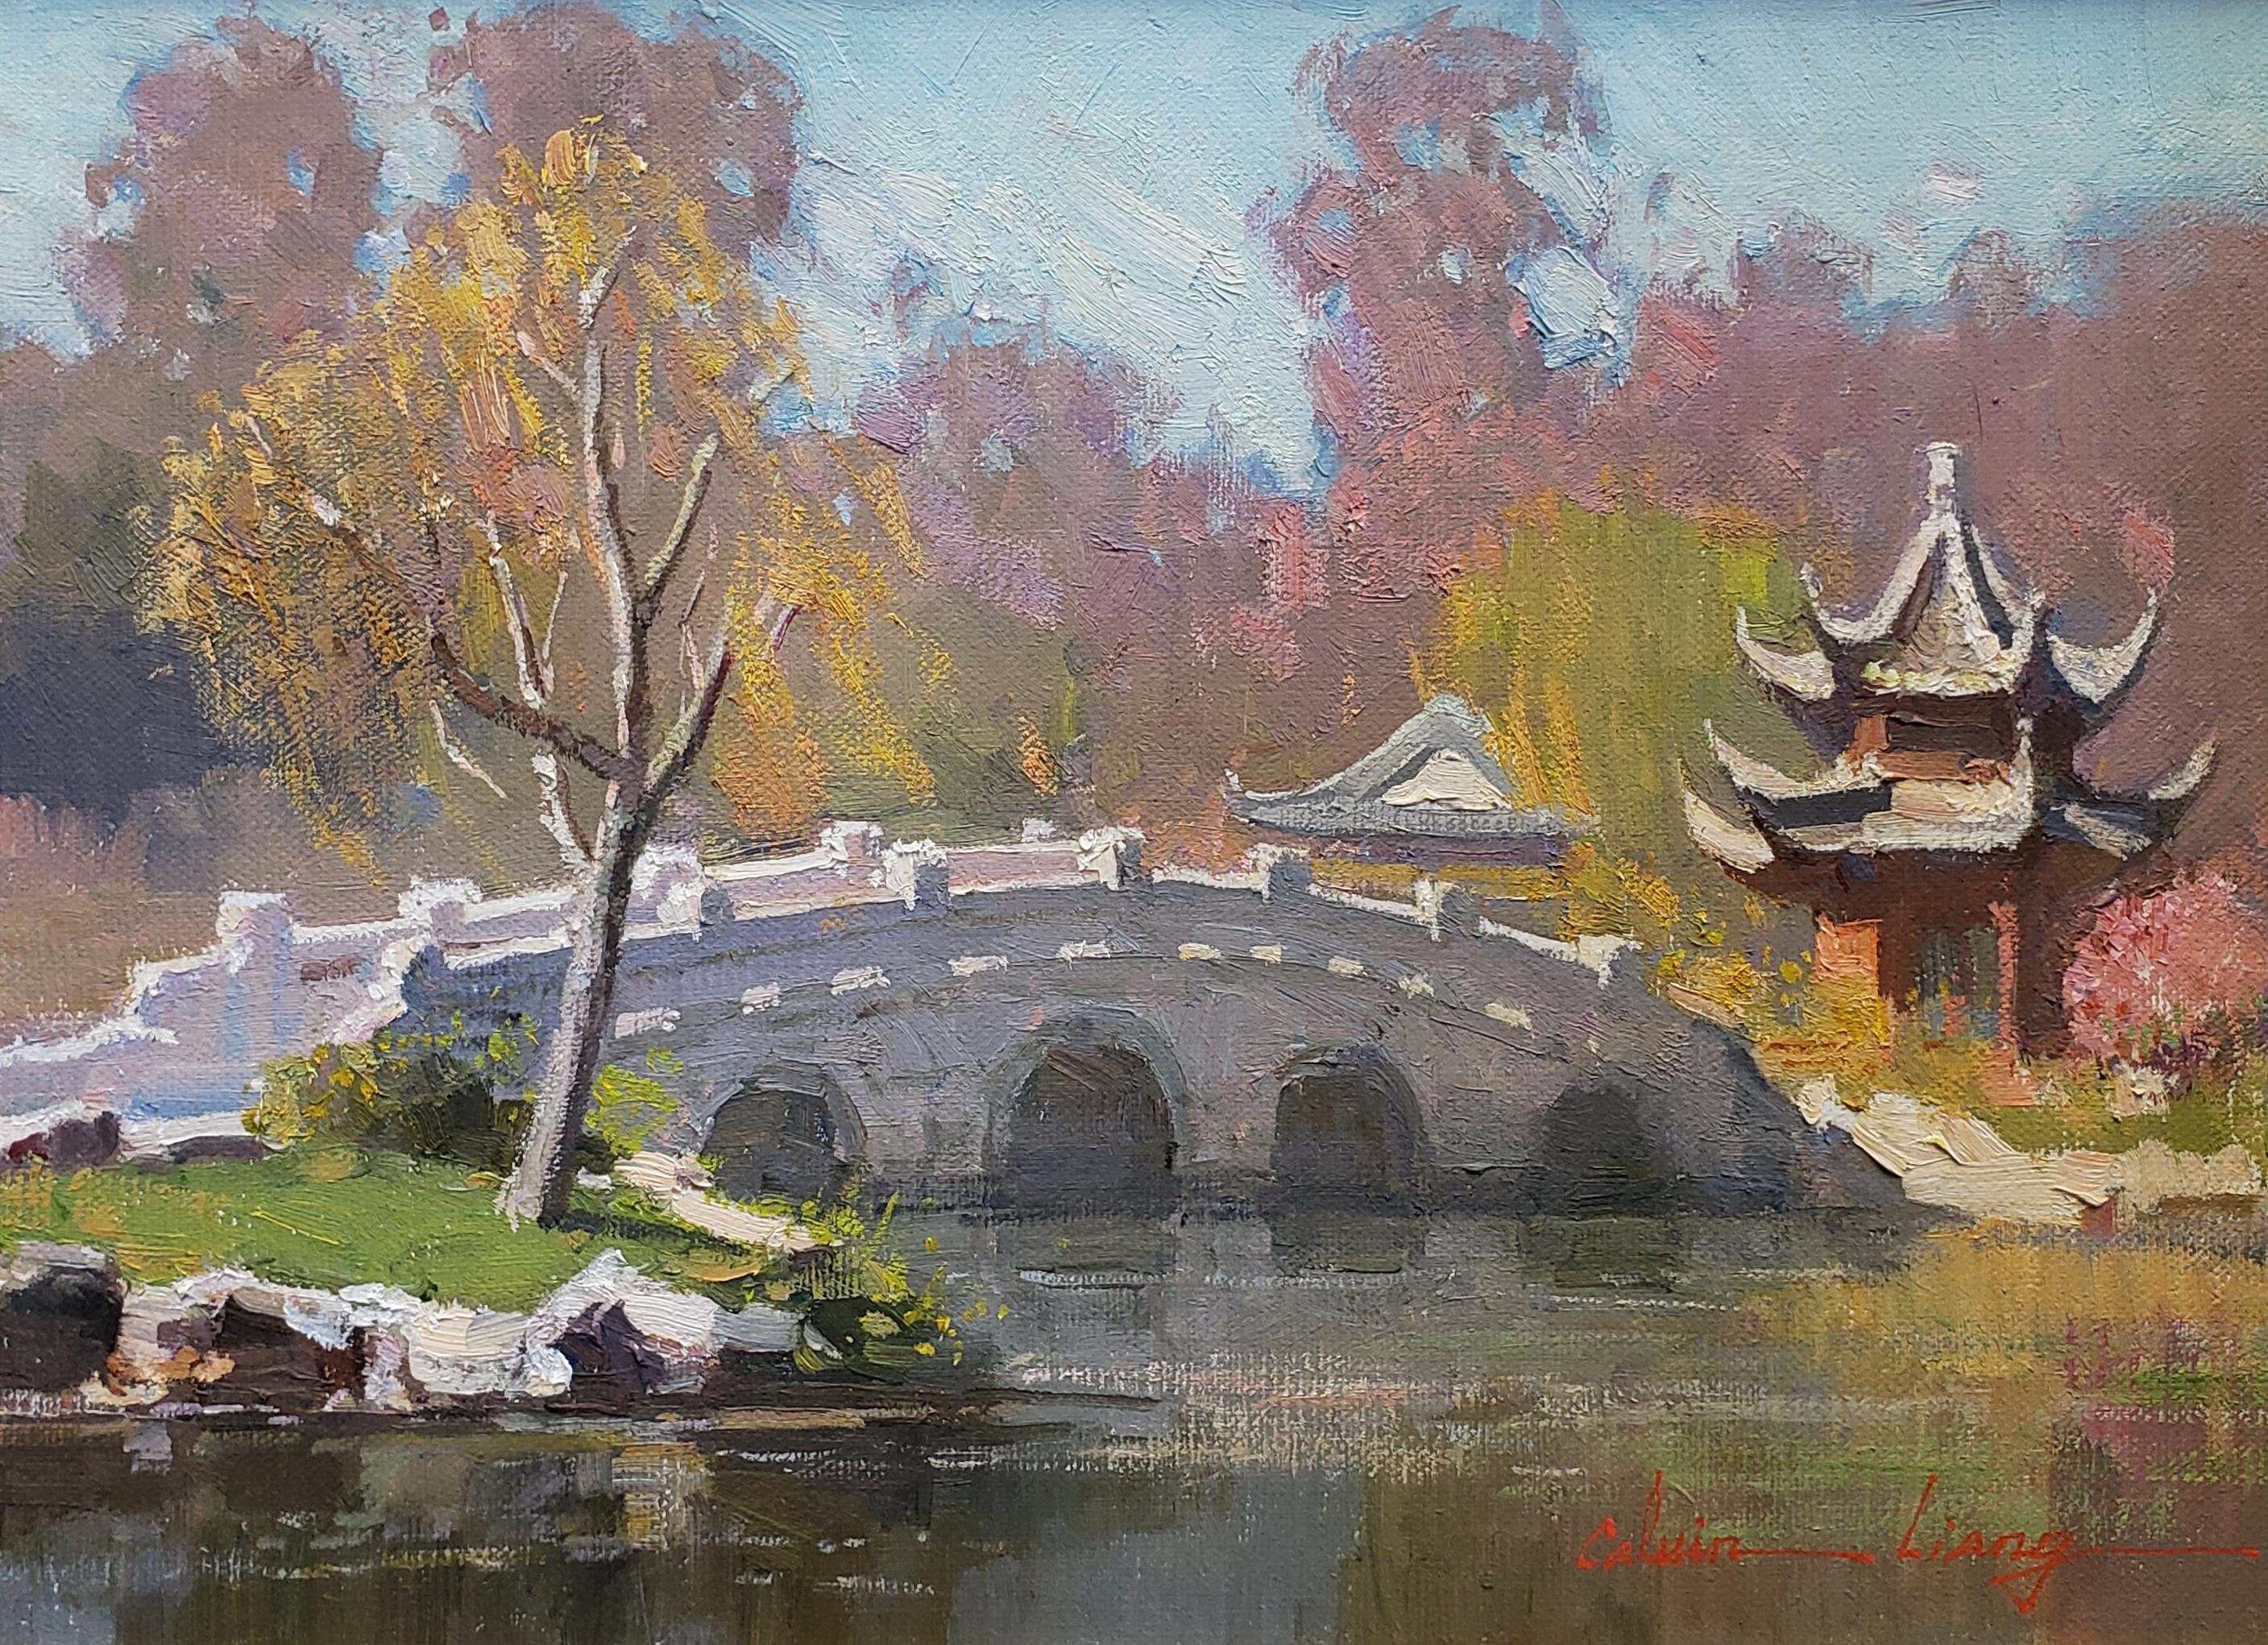 Chinese Garden, Huntington Library - Painting by Calvin Liang